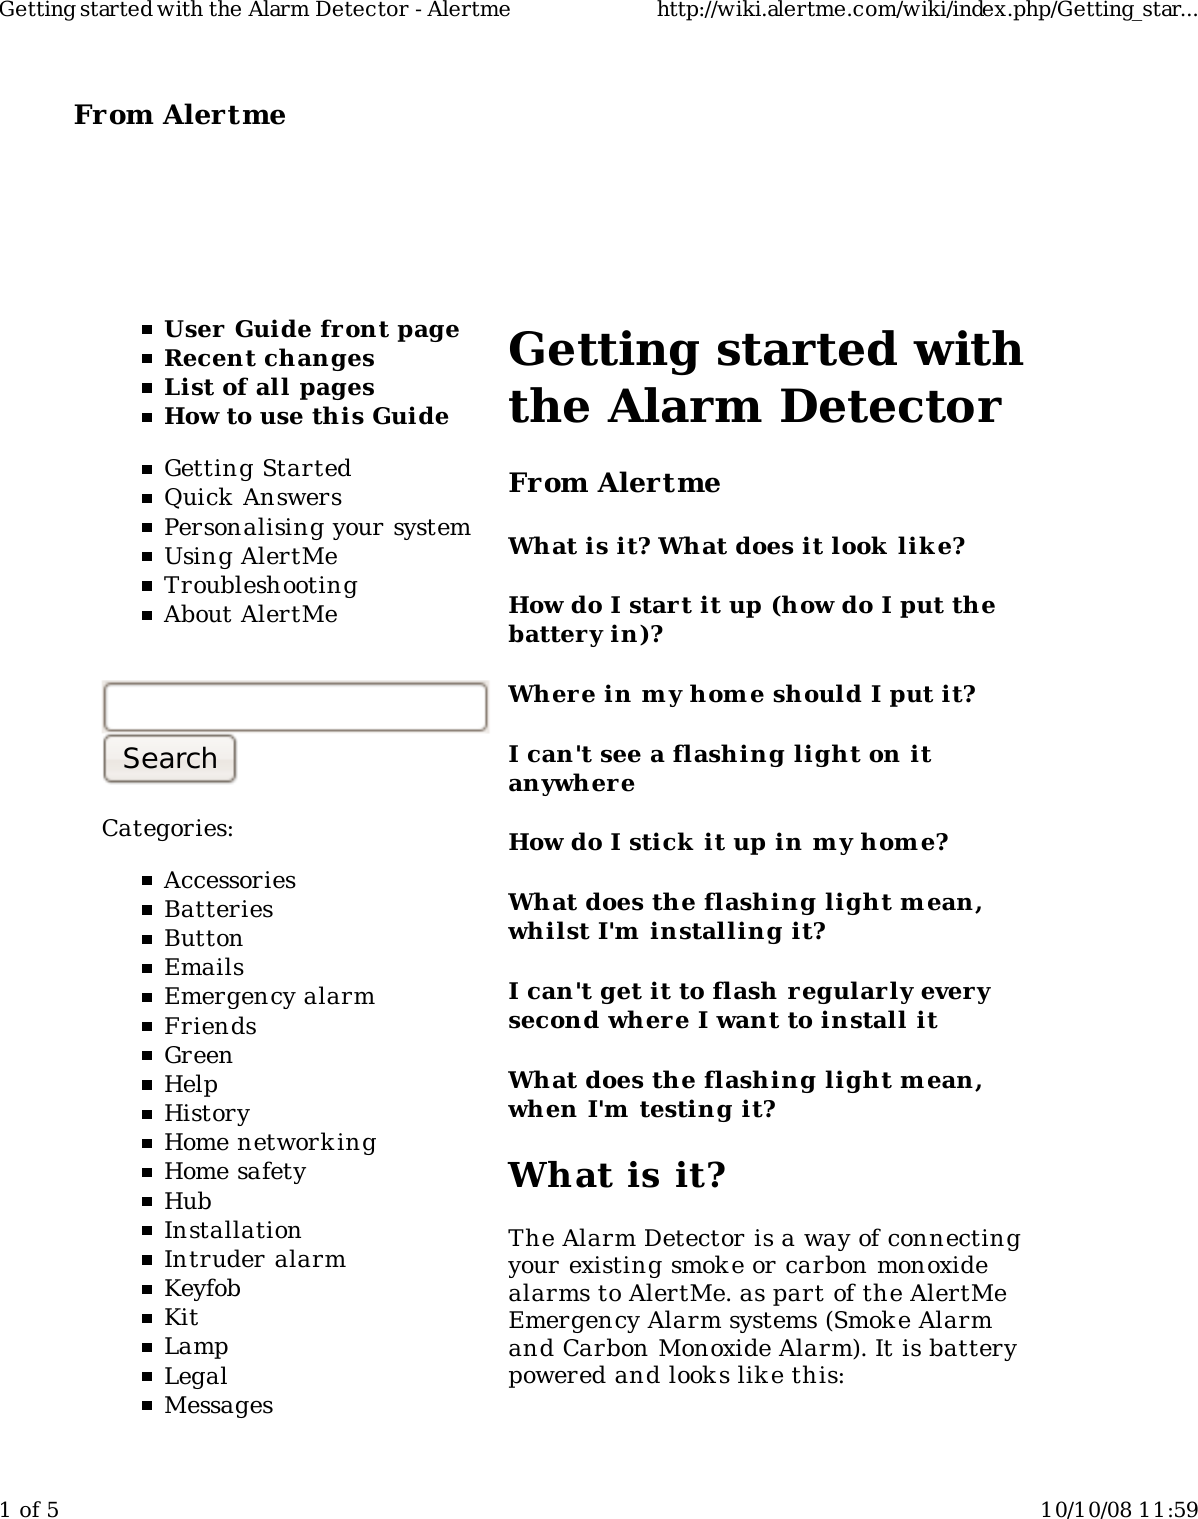 From Alertme  User Guide front pageRecent changesList of all pagesHow to use this GuideGetting StartedQuick AnswersPersonalising your systemUsing AlertMeTroubleshootingAbout AlertMeCategories:AccessoriesBatteriesButtonEmailsEmergency alarmFriendsGreenHelpHistoryHome network ingHome safetyHubInstallationIntruder alarmKeyfobKitLampLegalMessagesGetting started withthe Alarm DetectorFrom AlertmeWhat is it? What does it look  lik e?How do I start it up (how do I put thebattery in)?Wher e in my hom e should I put it?I can&apos;t see a flashing light on itanywhereHow do I stick it up in m y home?What does the flashing light m ean,whilst I&apos;m  installing it?I can&apos;t get it to flash regularly everysecond where I want to install itWhat does the flashing light m ean,when I&apos;m  testing it?What is it?The Alarm Detector is a way of connectingyour existing smok e or carbon monoxidealarms to AlertMe. as part of the AlertMeEmergency Alarm systems (Smoke Alarmand Carbon Monoxide Alarm). It is batterypowered and look s like this:Getting started with the Alarm Detector - Alertme http://wiki.alertme.com/wiki/index.php/Getting_star...1 of 5 10/10/08 11:59